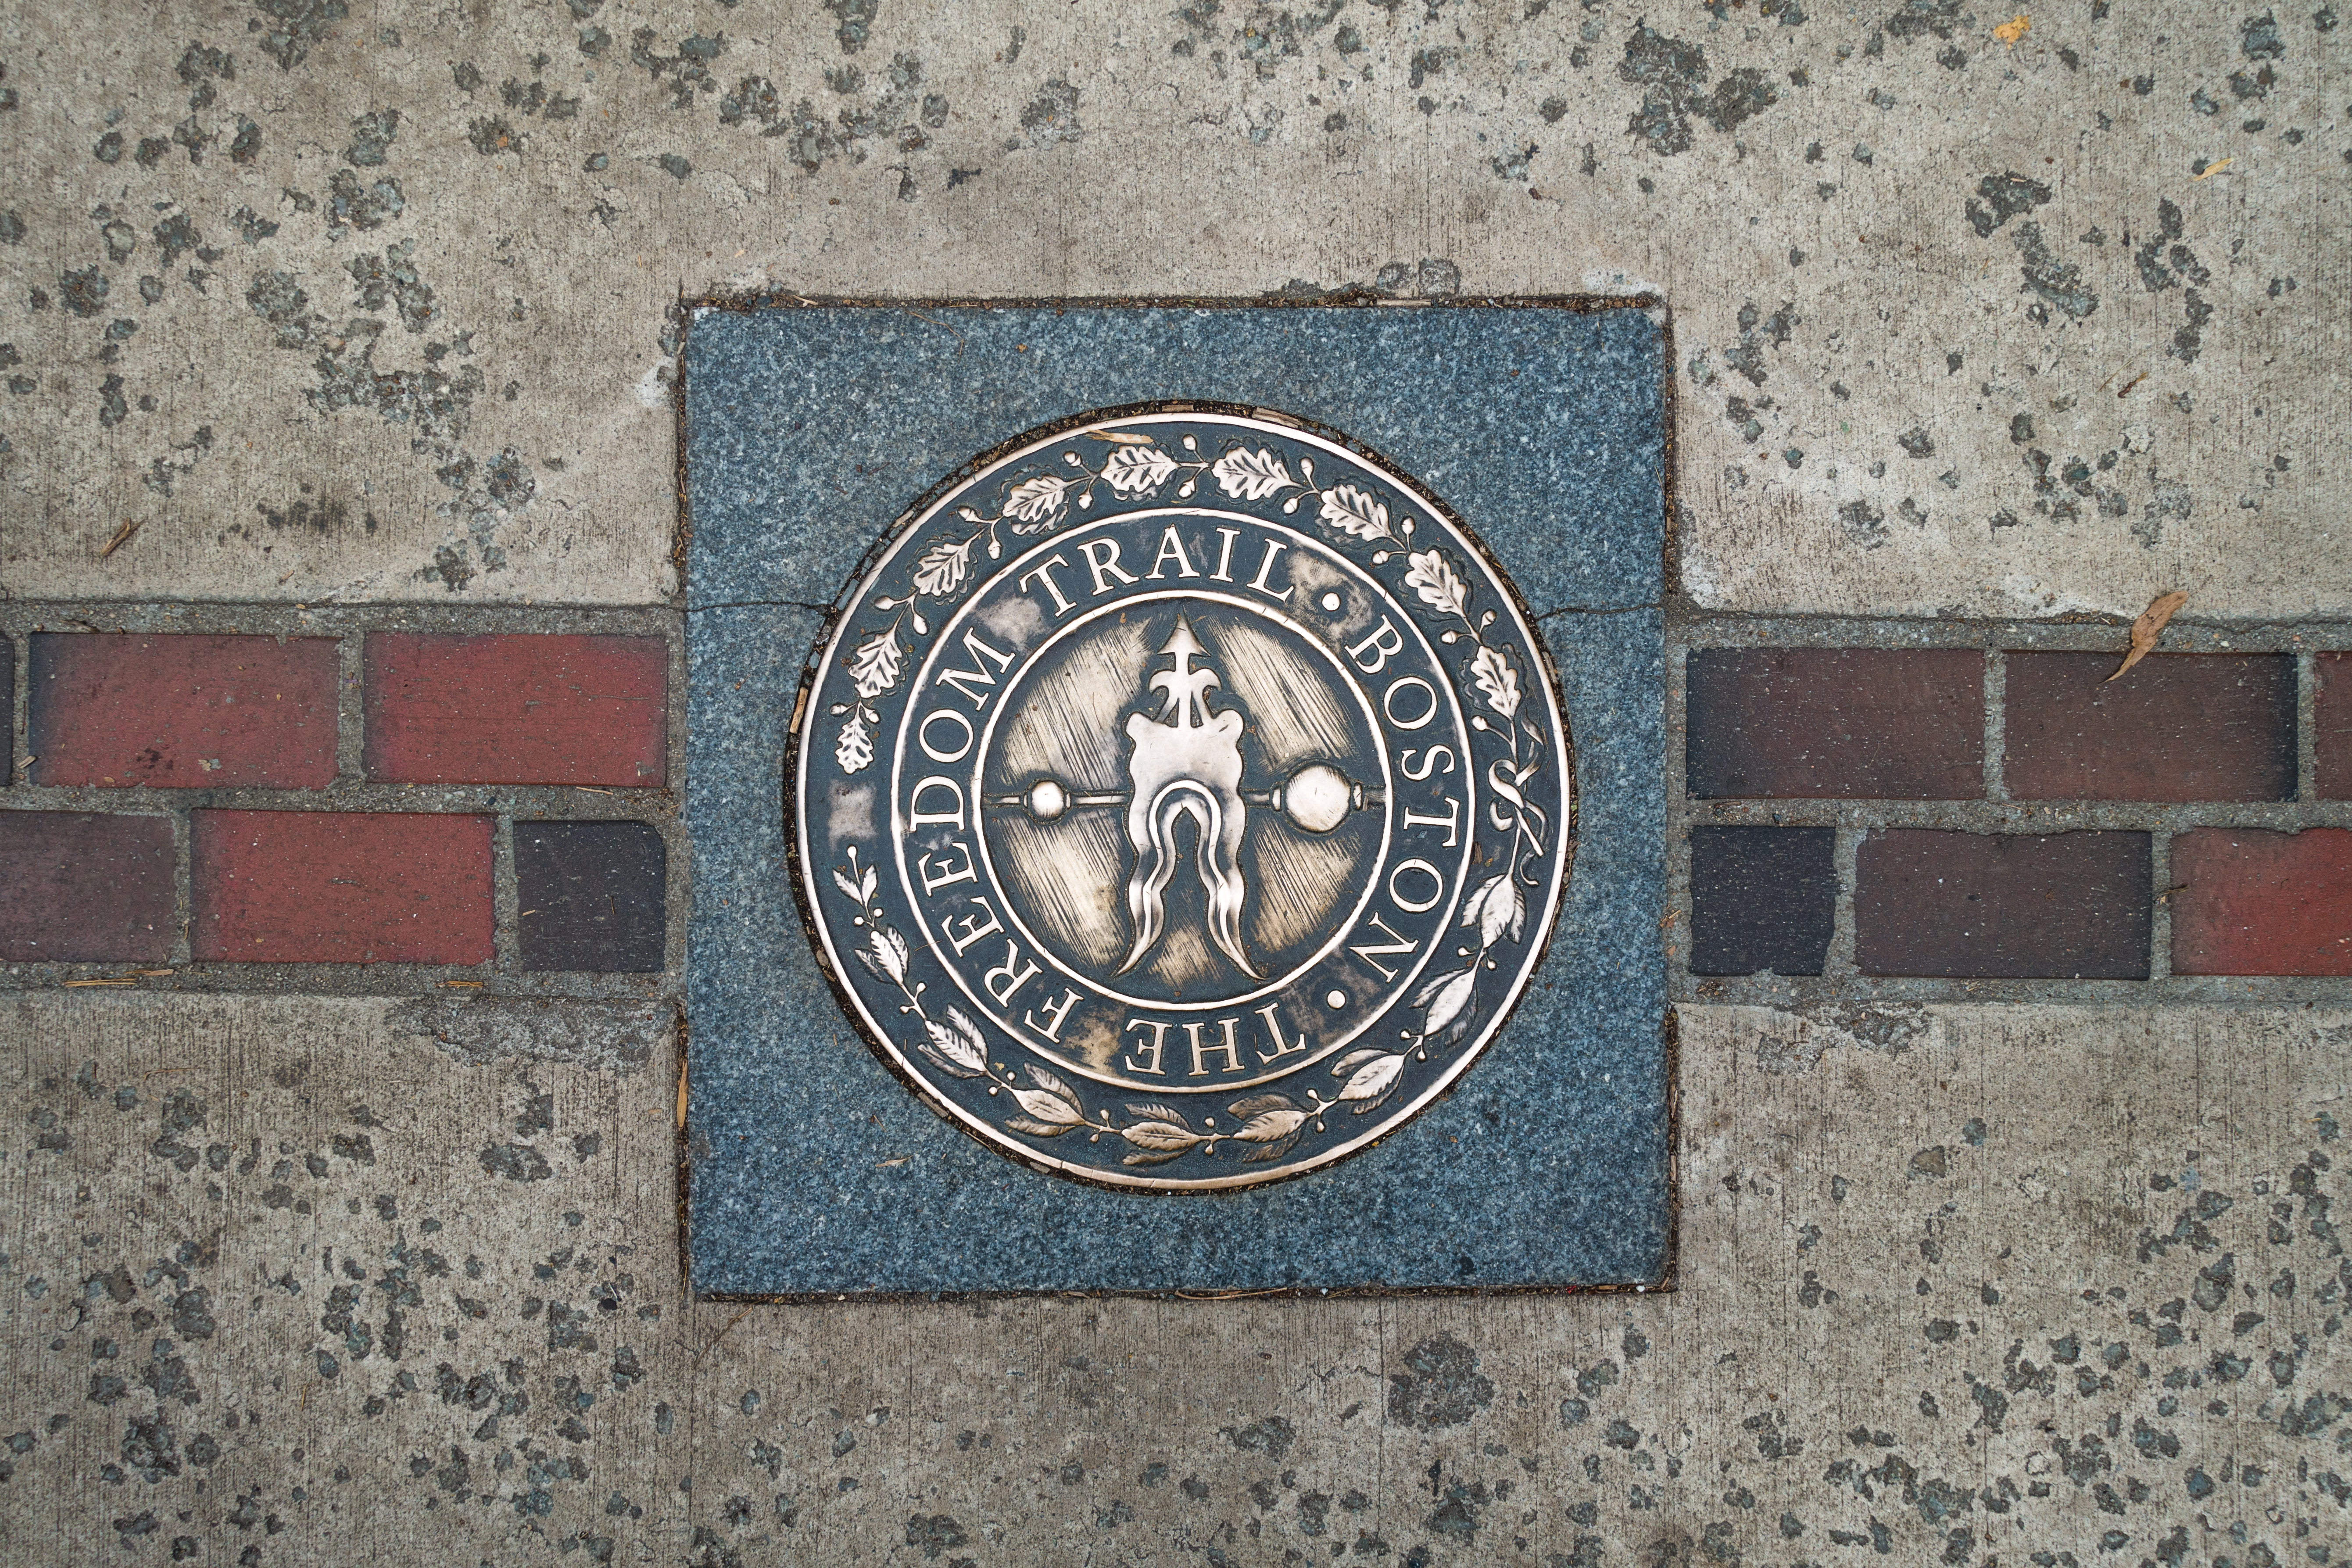 Plaque marking the Boston Freedom Trail